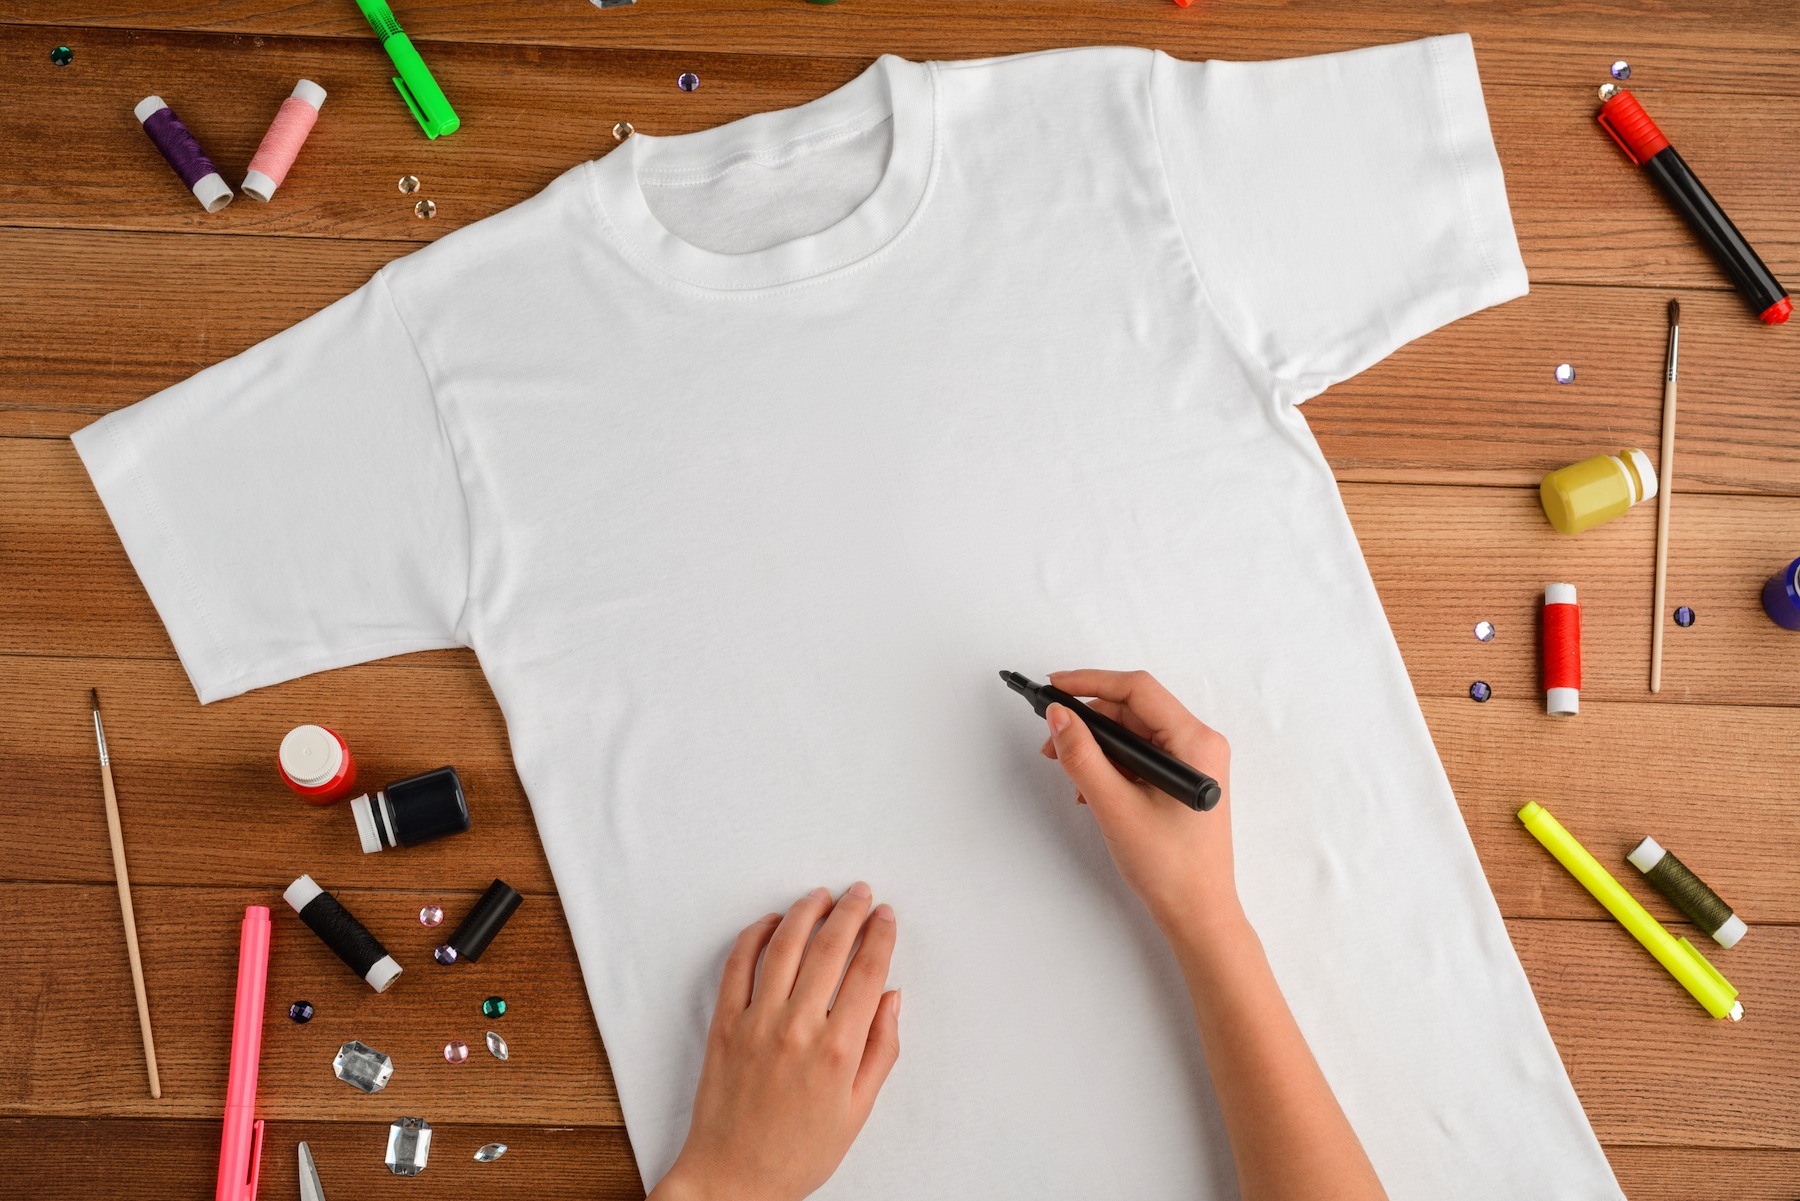 drawing on a white t-shirt